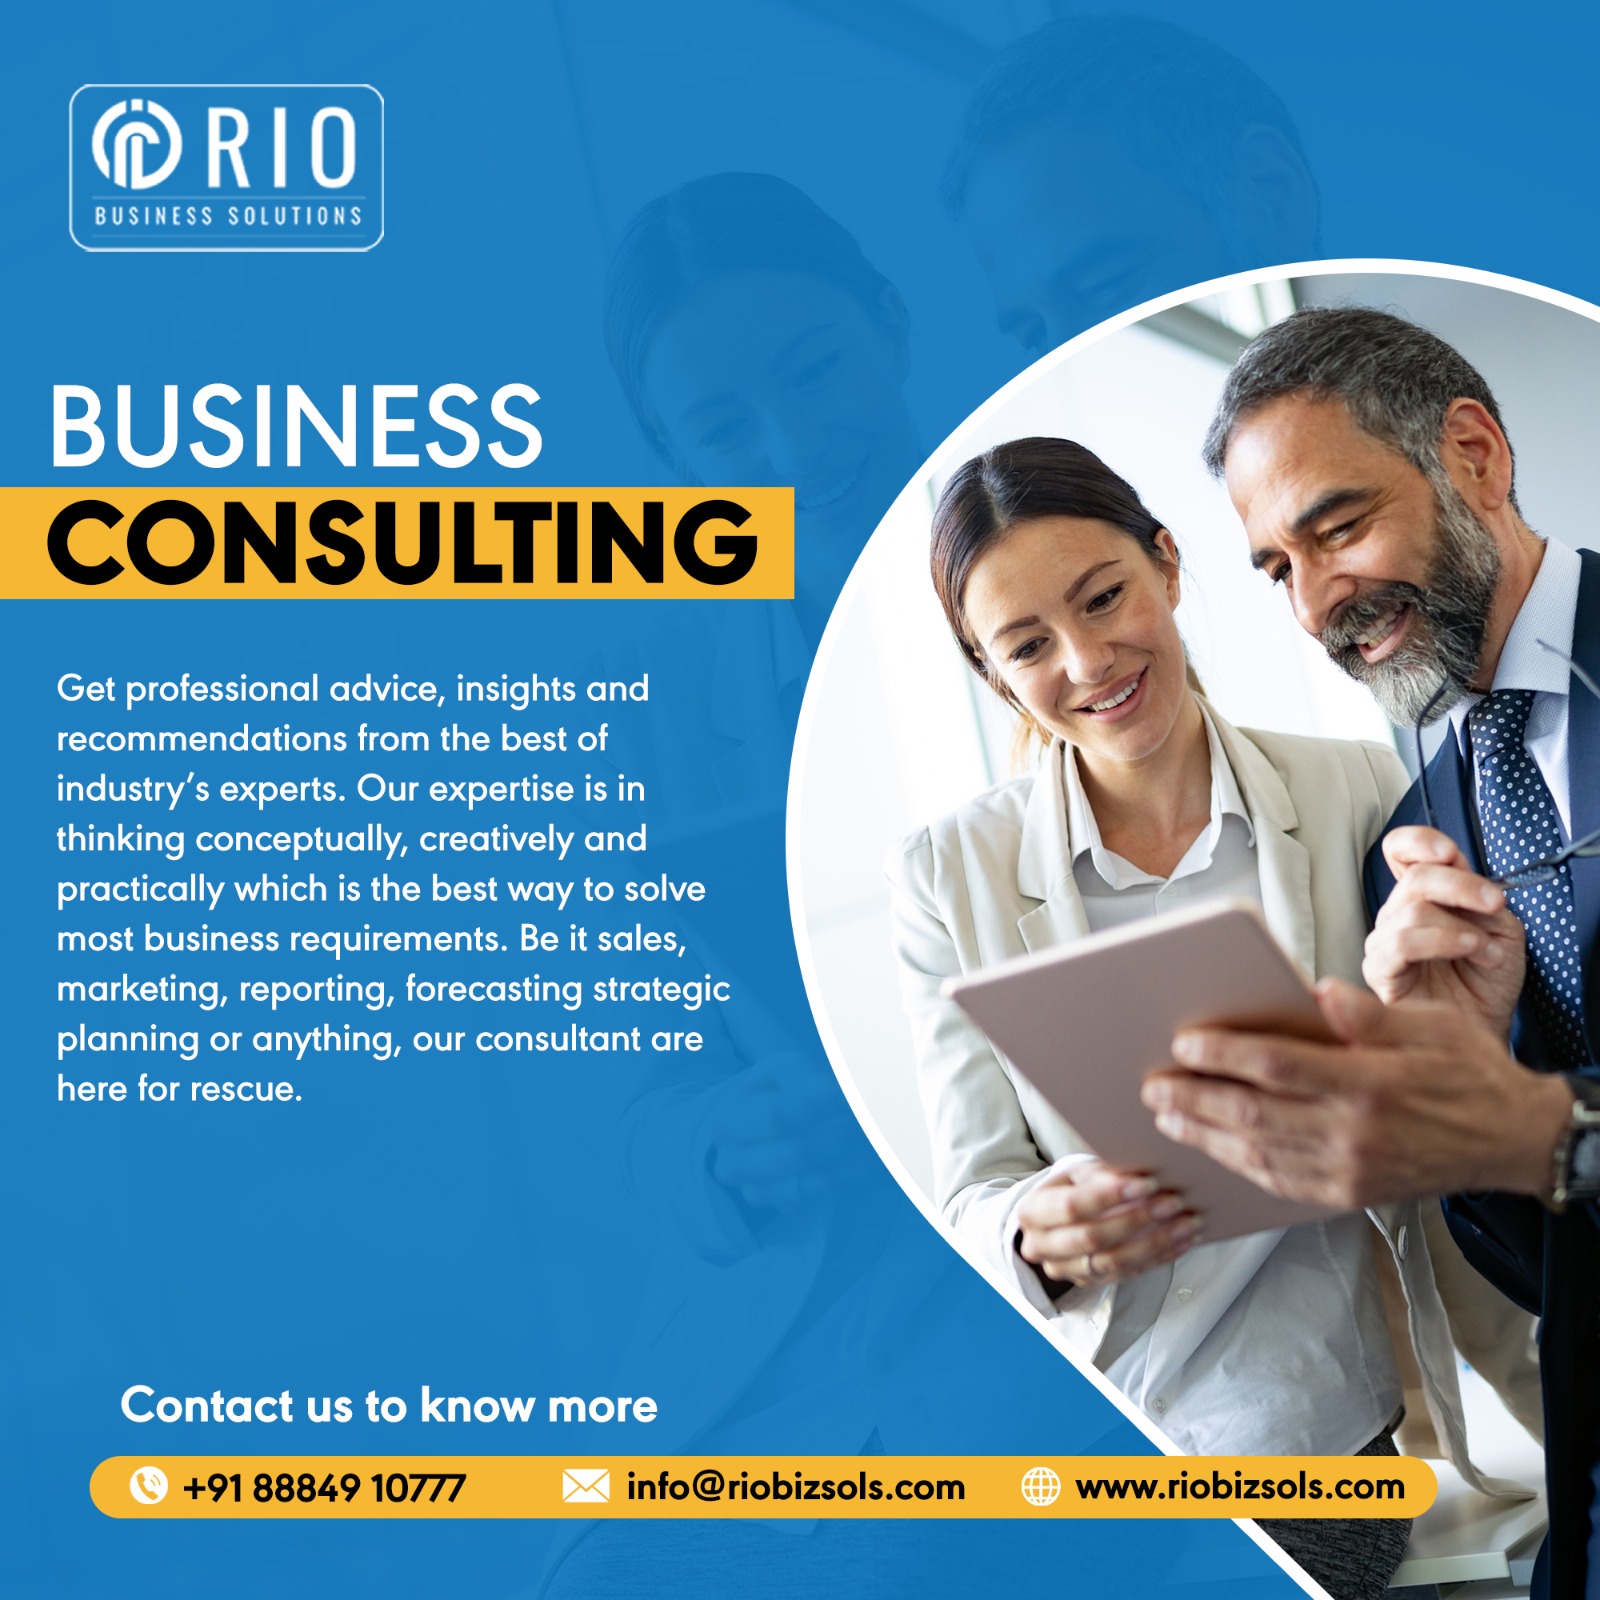 Business Consulting Services USA  Business Consulting Compa - California - San Francisco ID1515790 1